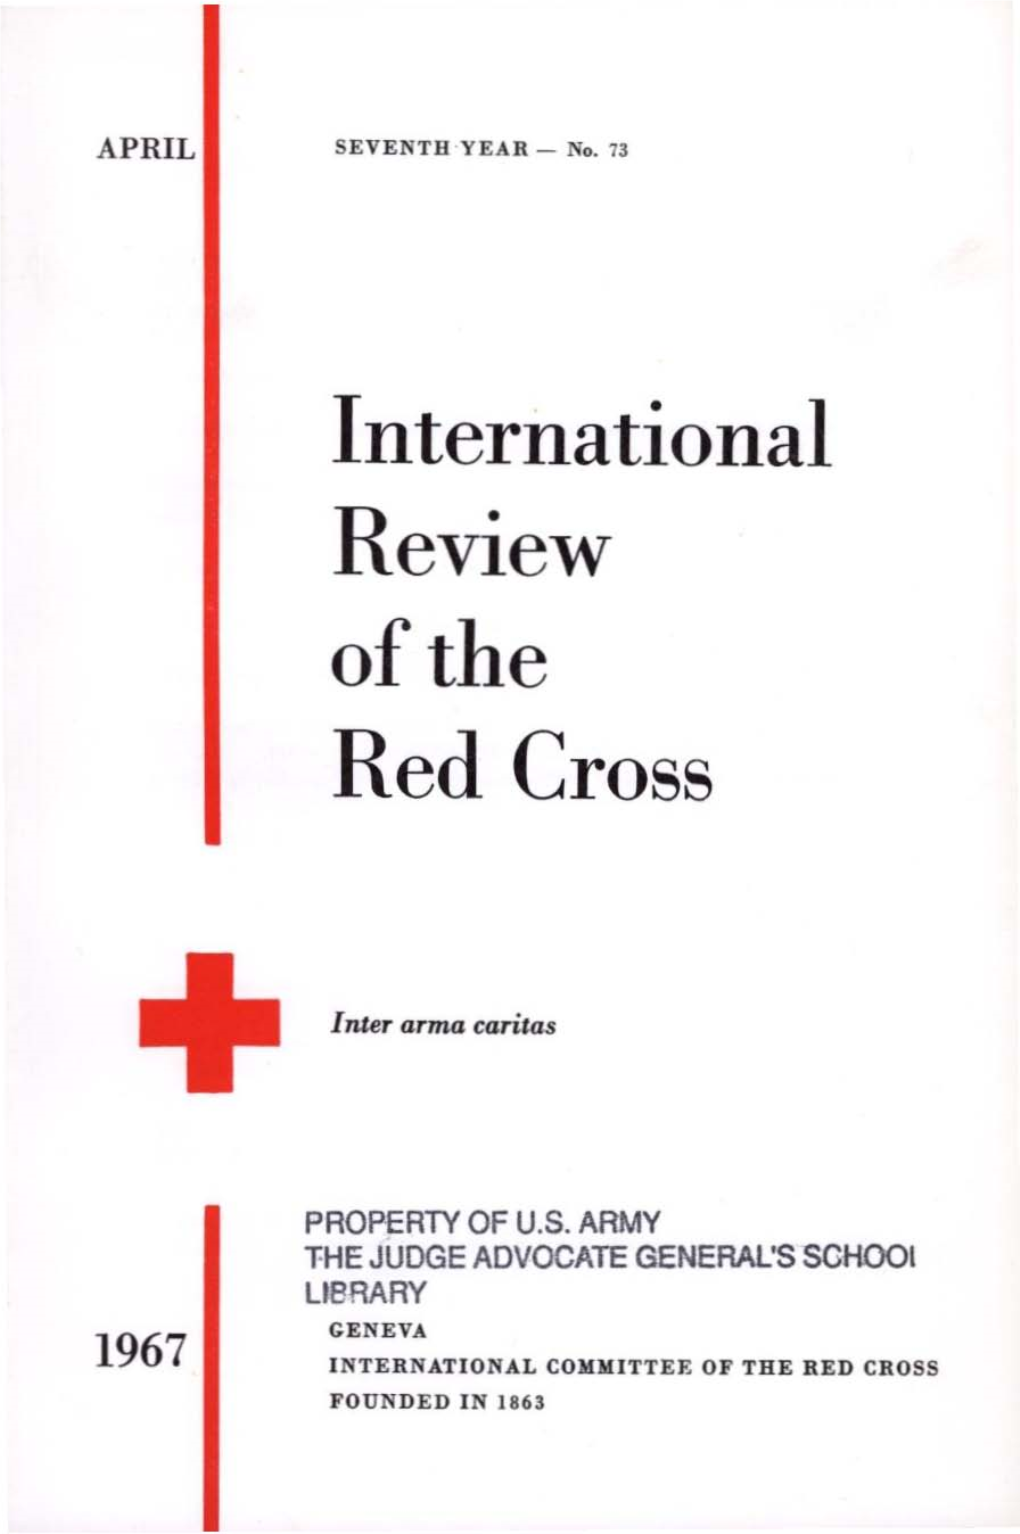 International Review of the Red Cross, April 1967, Seventh Year